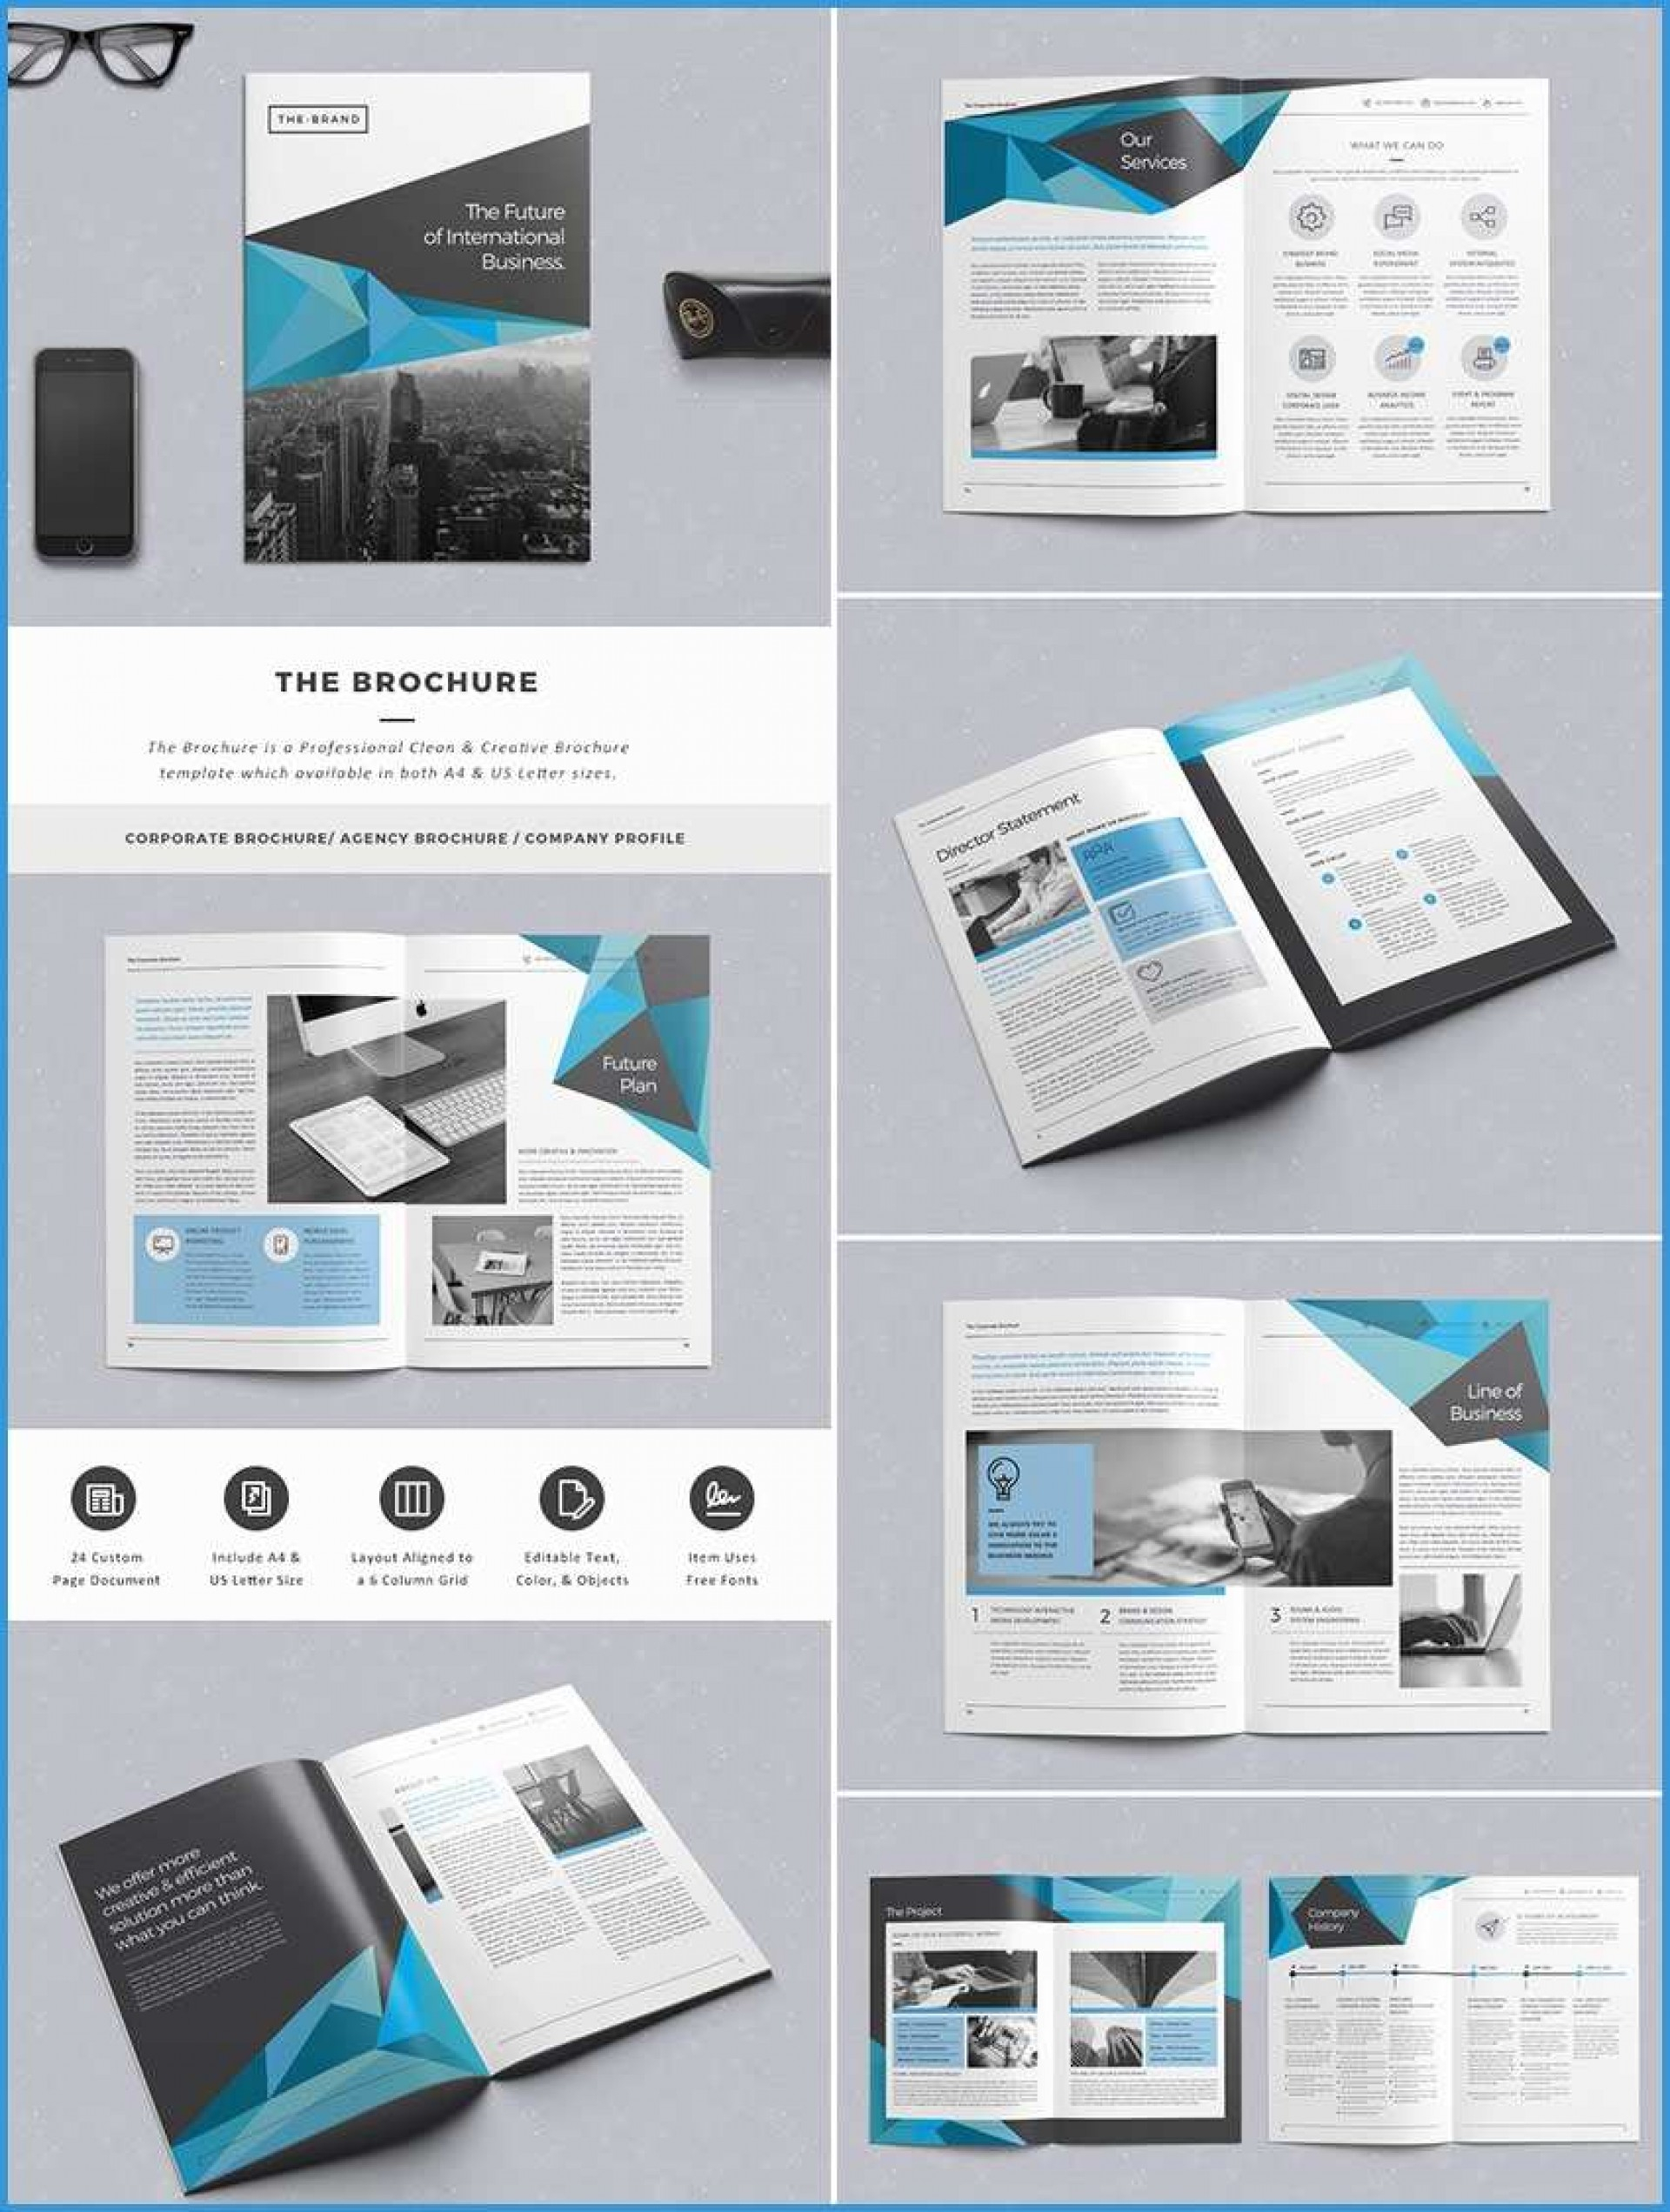 044 Adobe Indesign Flyer Templates Free Awesome Brochure Throughout Adobe Indesign Brochure Templates